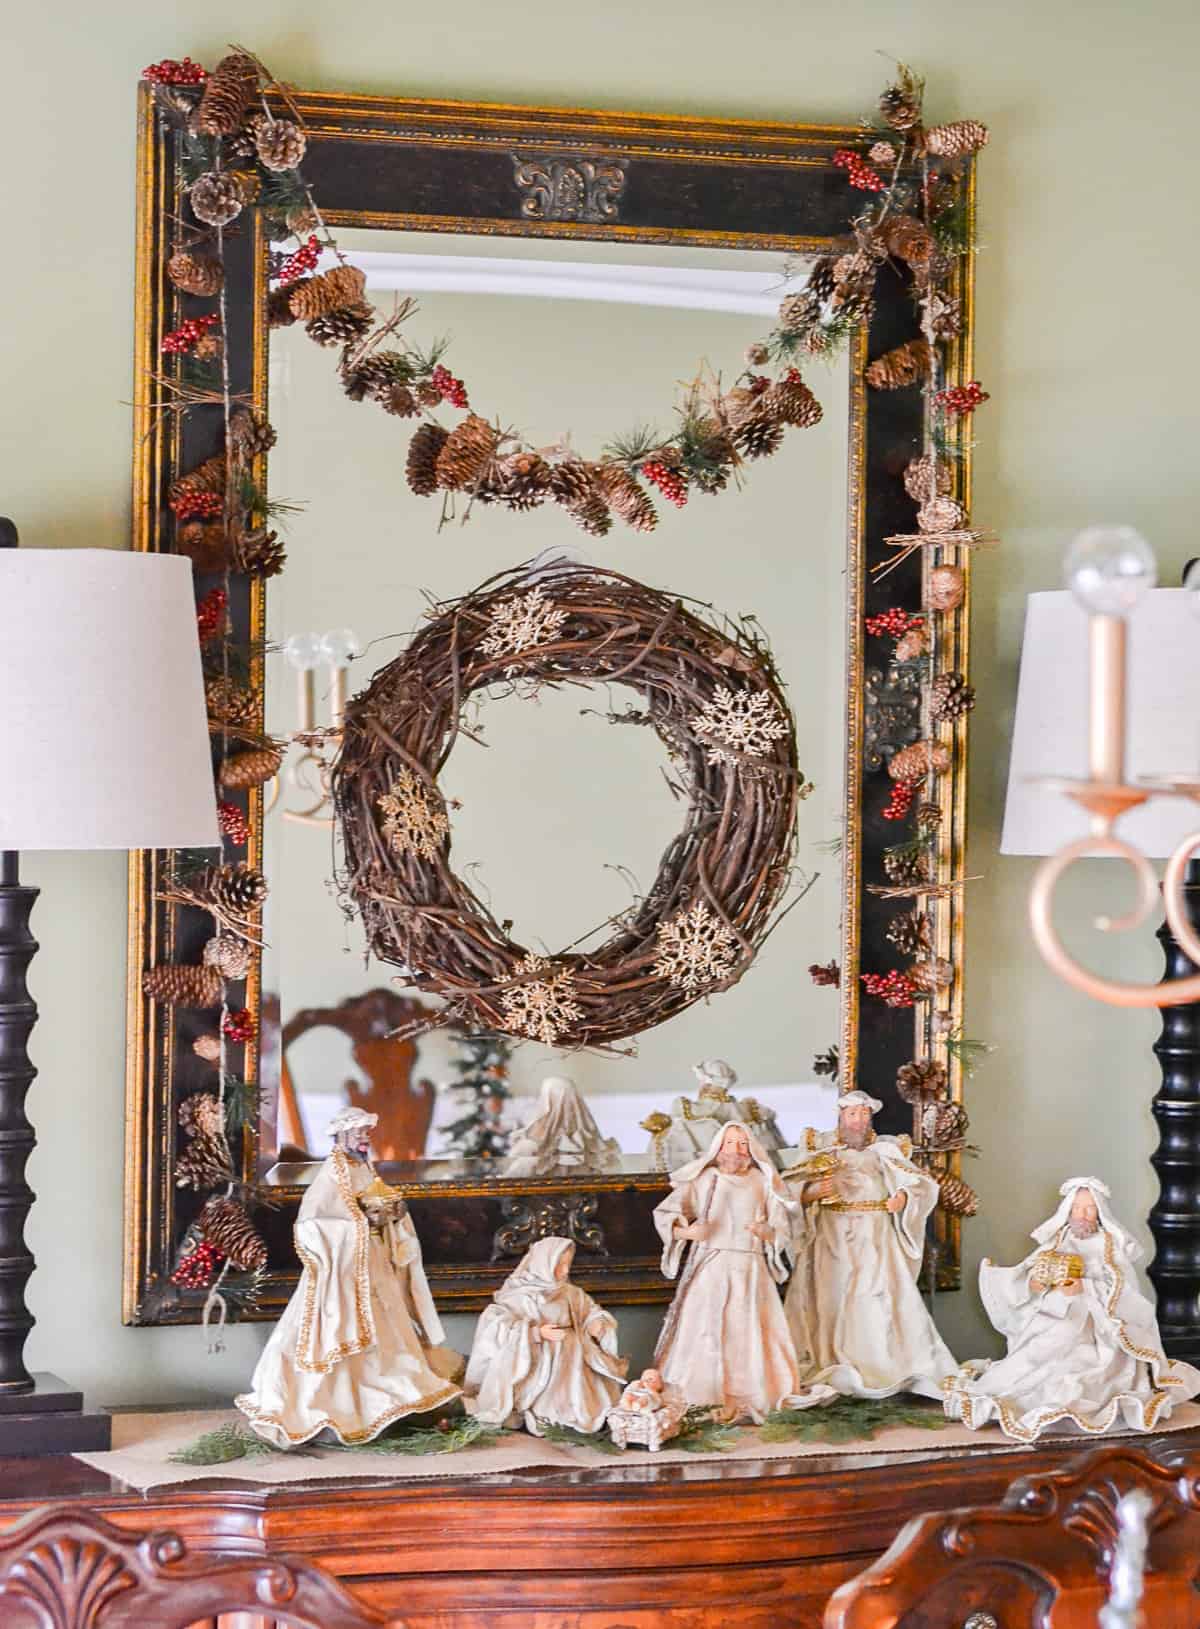 neutral colored nativity scene display on a sideboard with a mirror hanging above